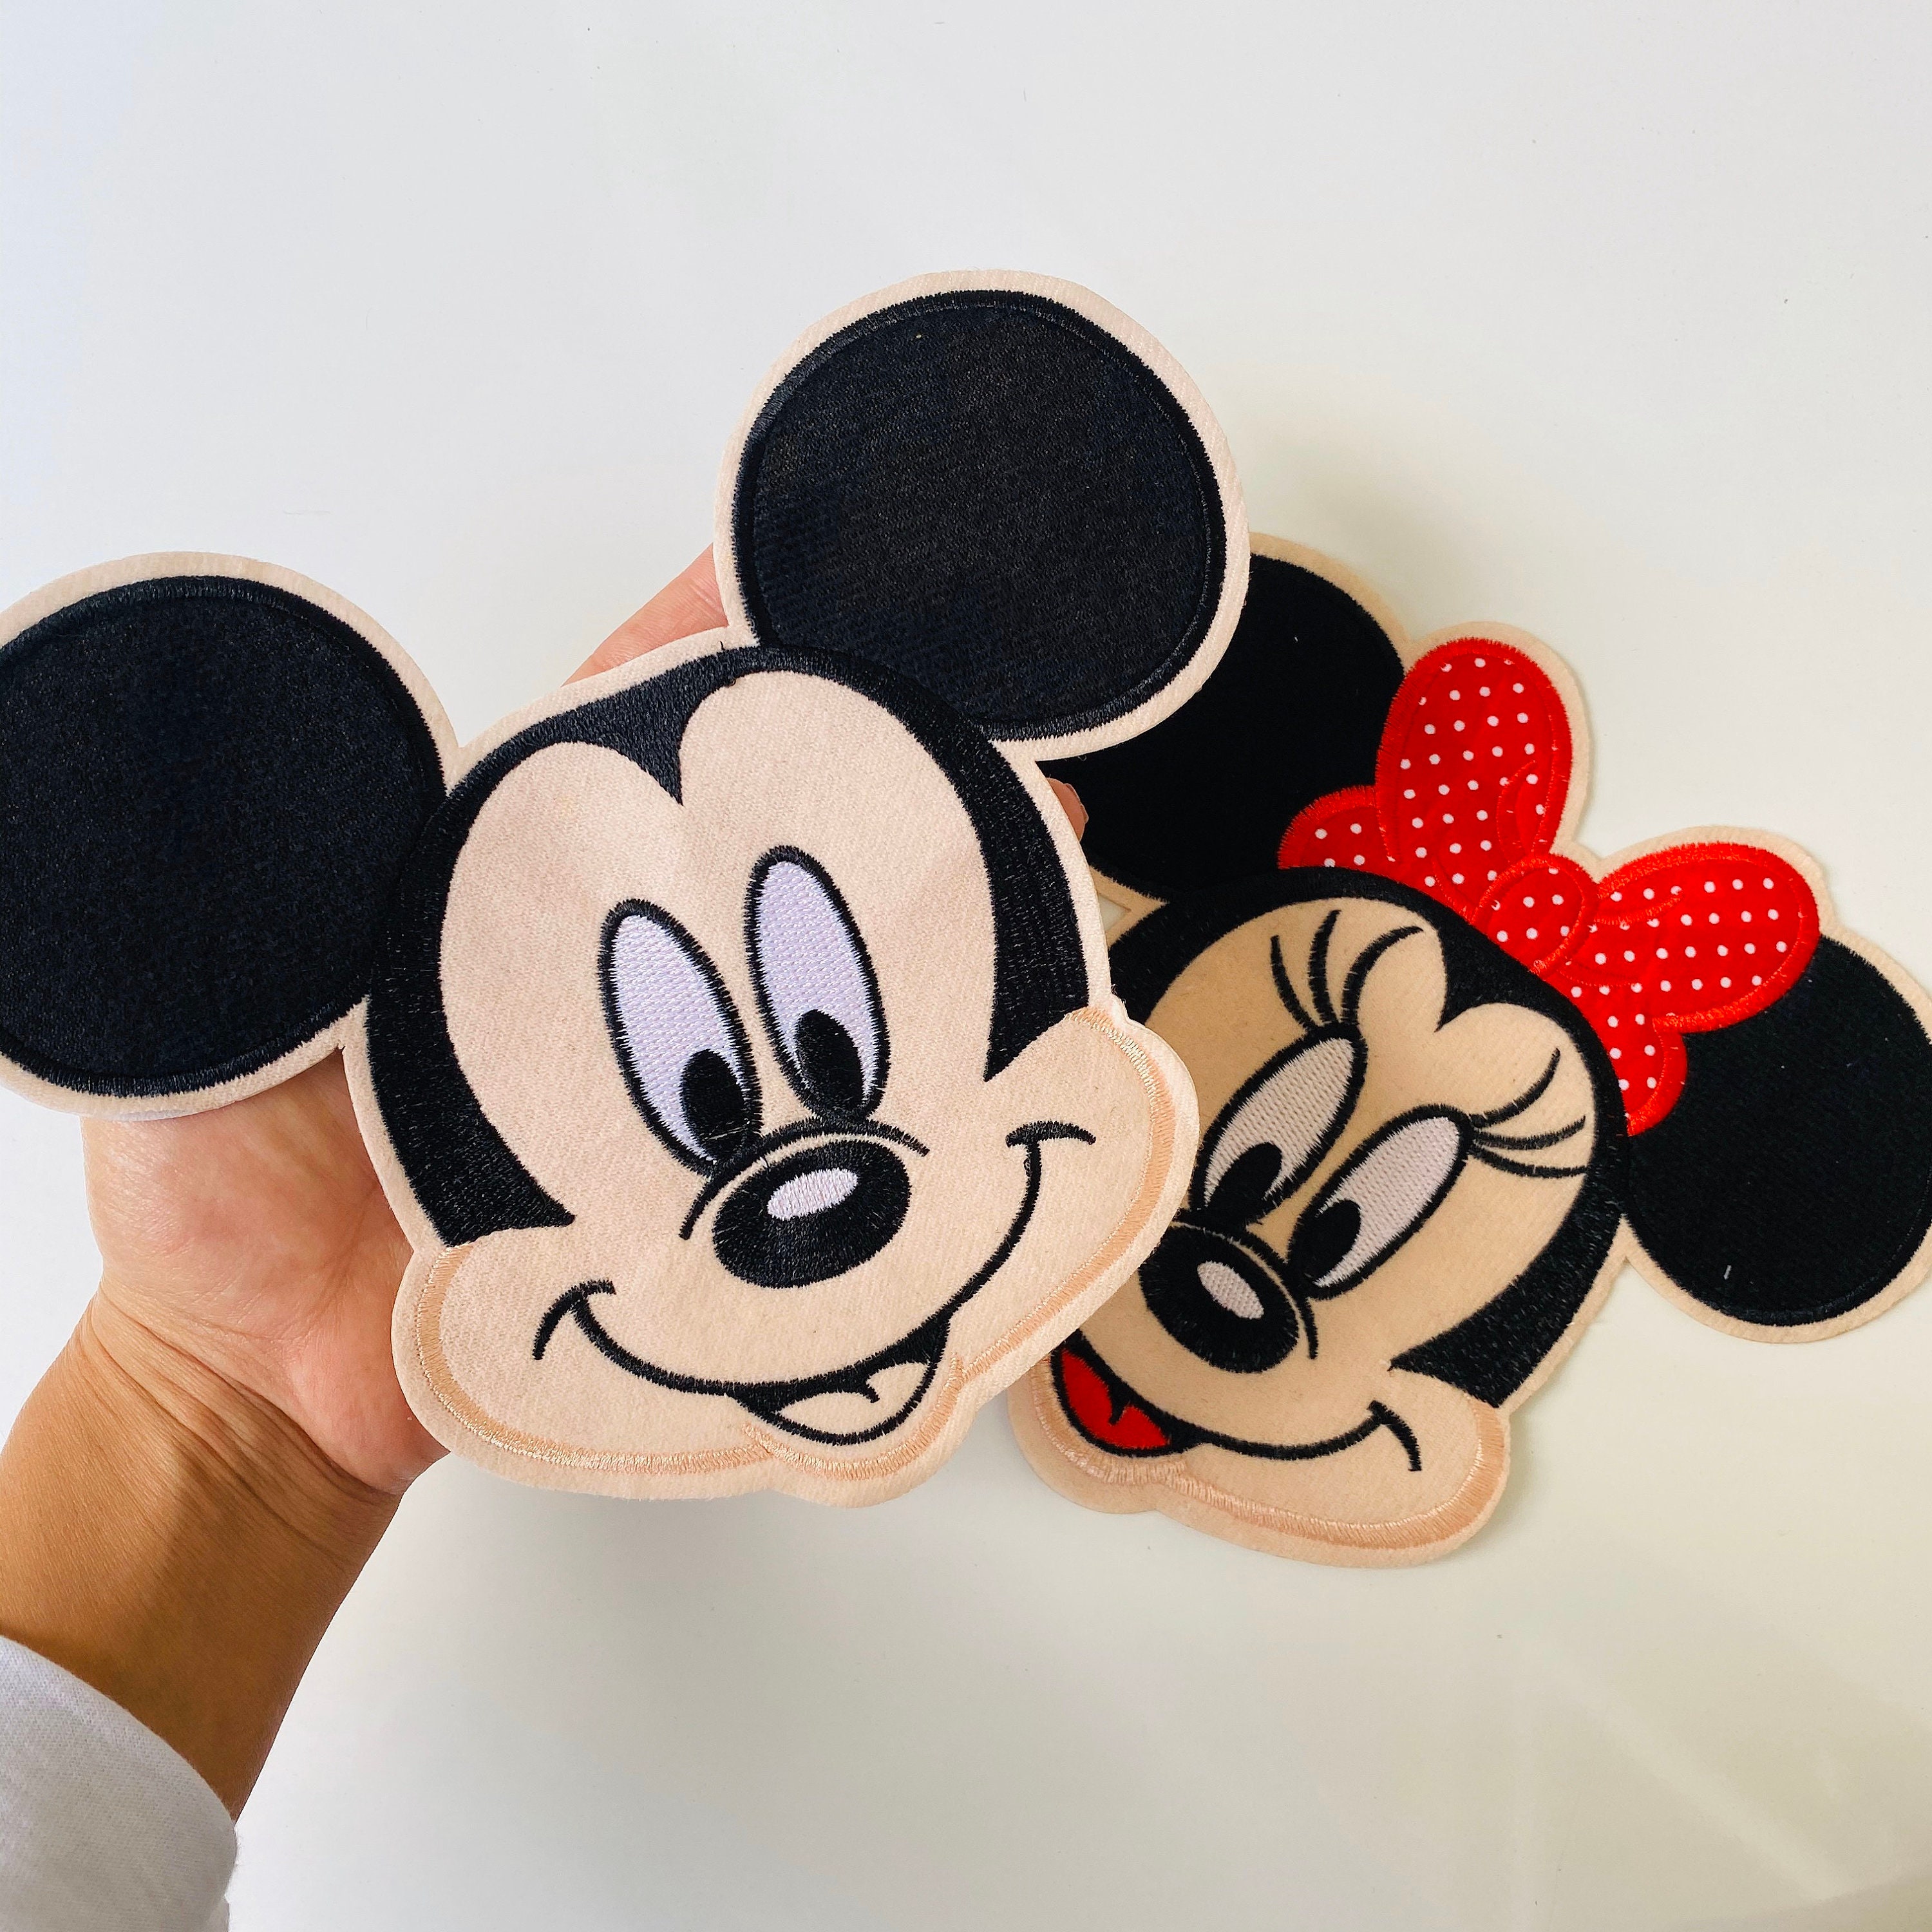 Mickey Mouse Heart Iron-on Sew-on Embroidered Patch, Custom Patch, Limited  Edition Patch, Patches, Pins, Embroidered Costume Cosplay Disney 